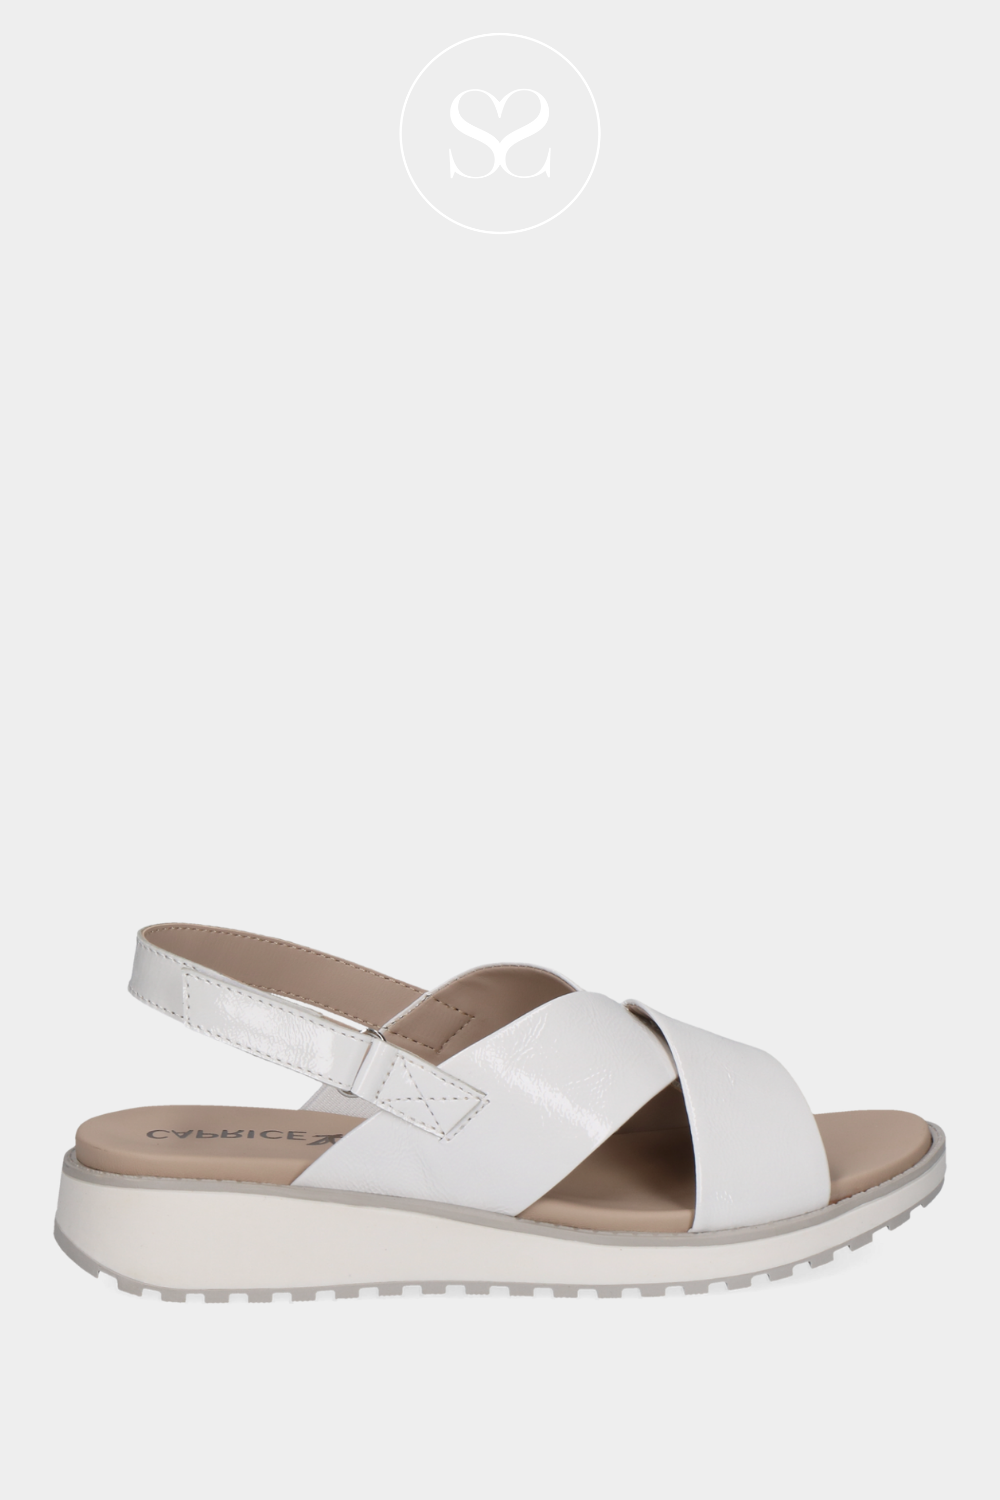 CAPRICE 9-28703-42 WHITE LEATHER CRISS CROSS STRAPS WEDGE SANDALS WITH SLINGBACK